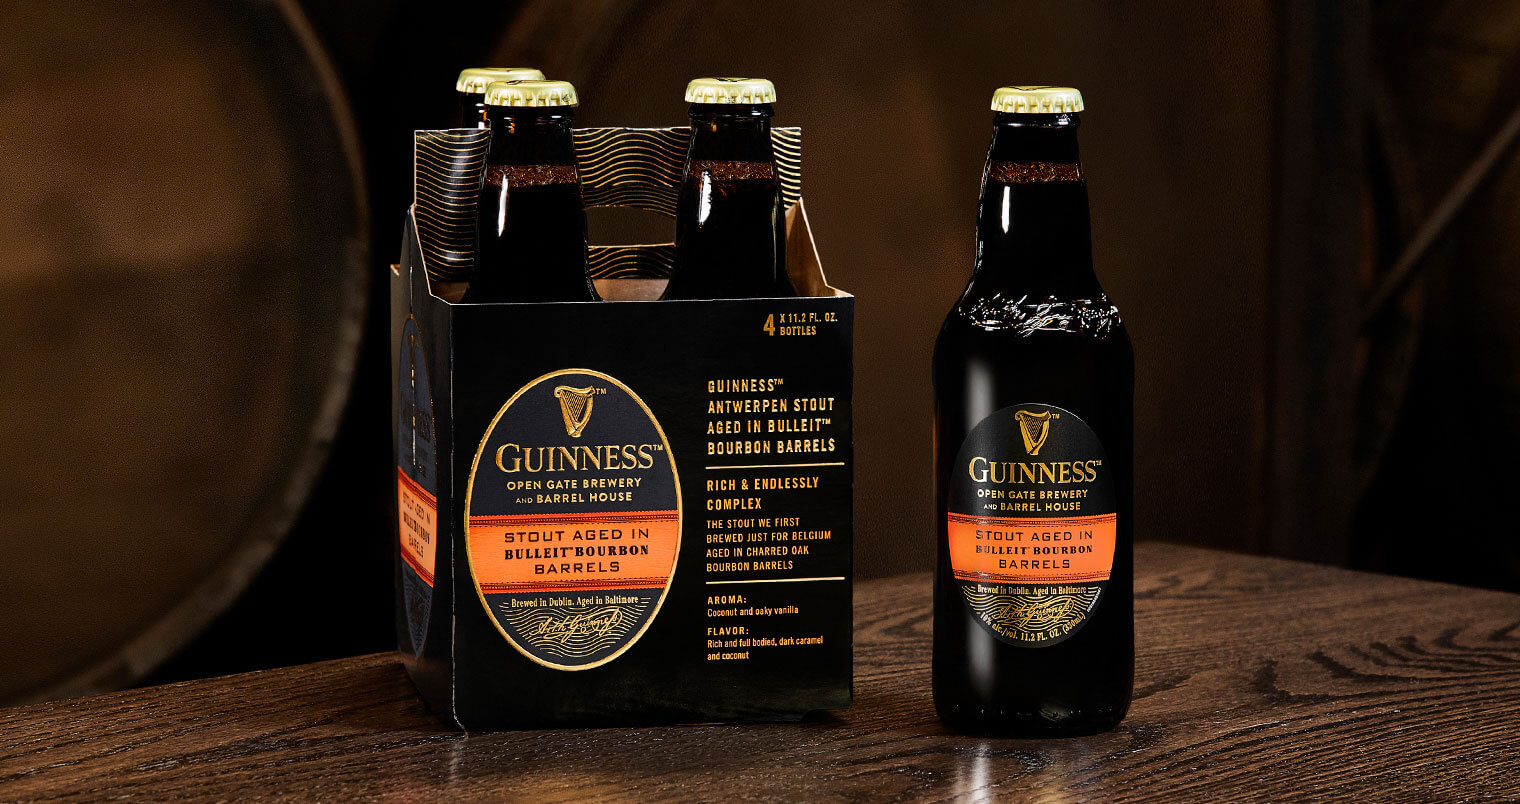 Guinness Barrel-Aged Beer Aged in Bulleit Bourbon Barrels, bottles and package, featured image